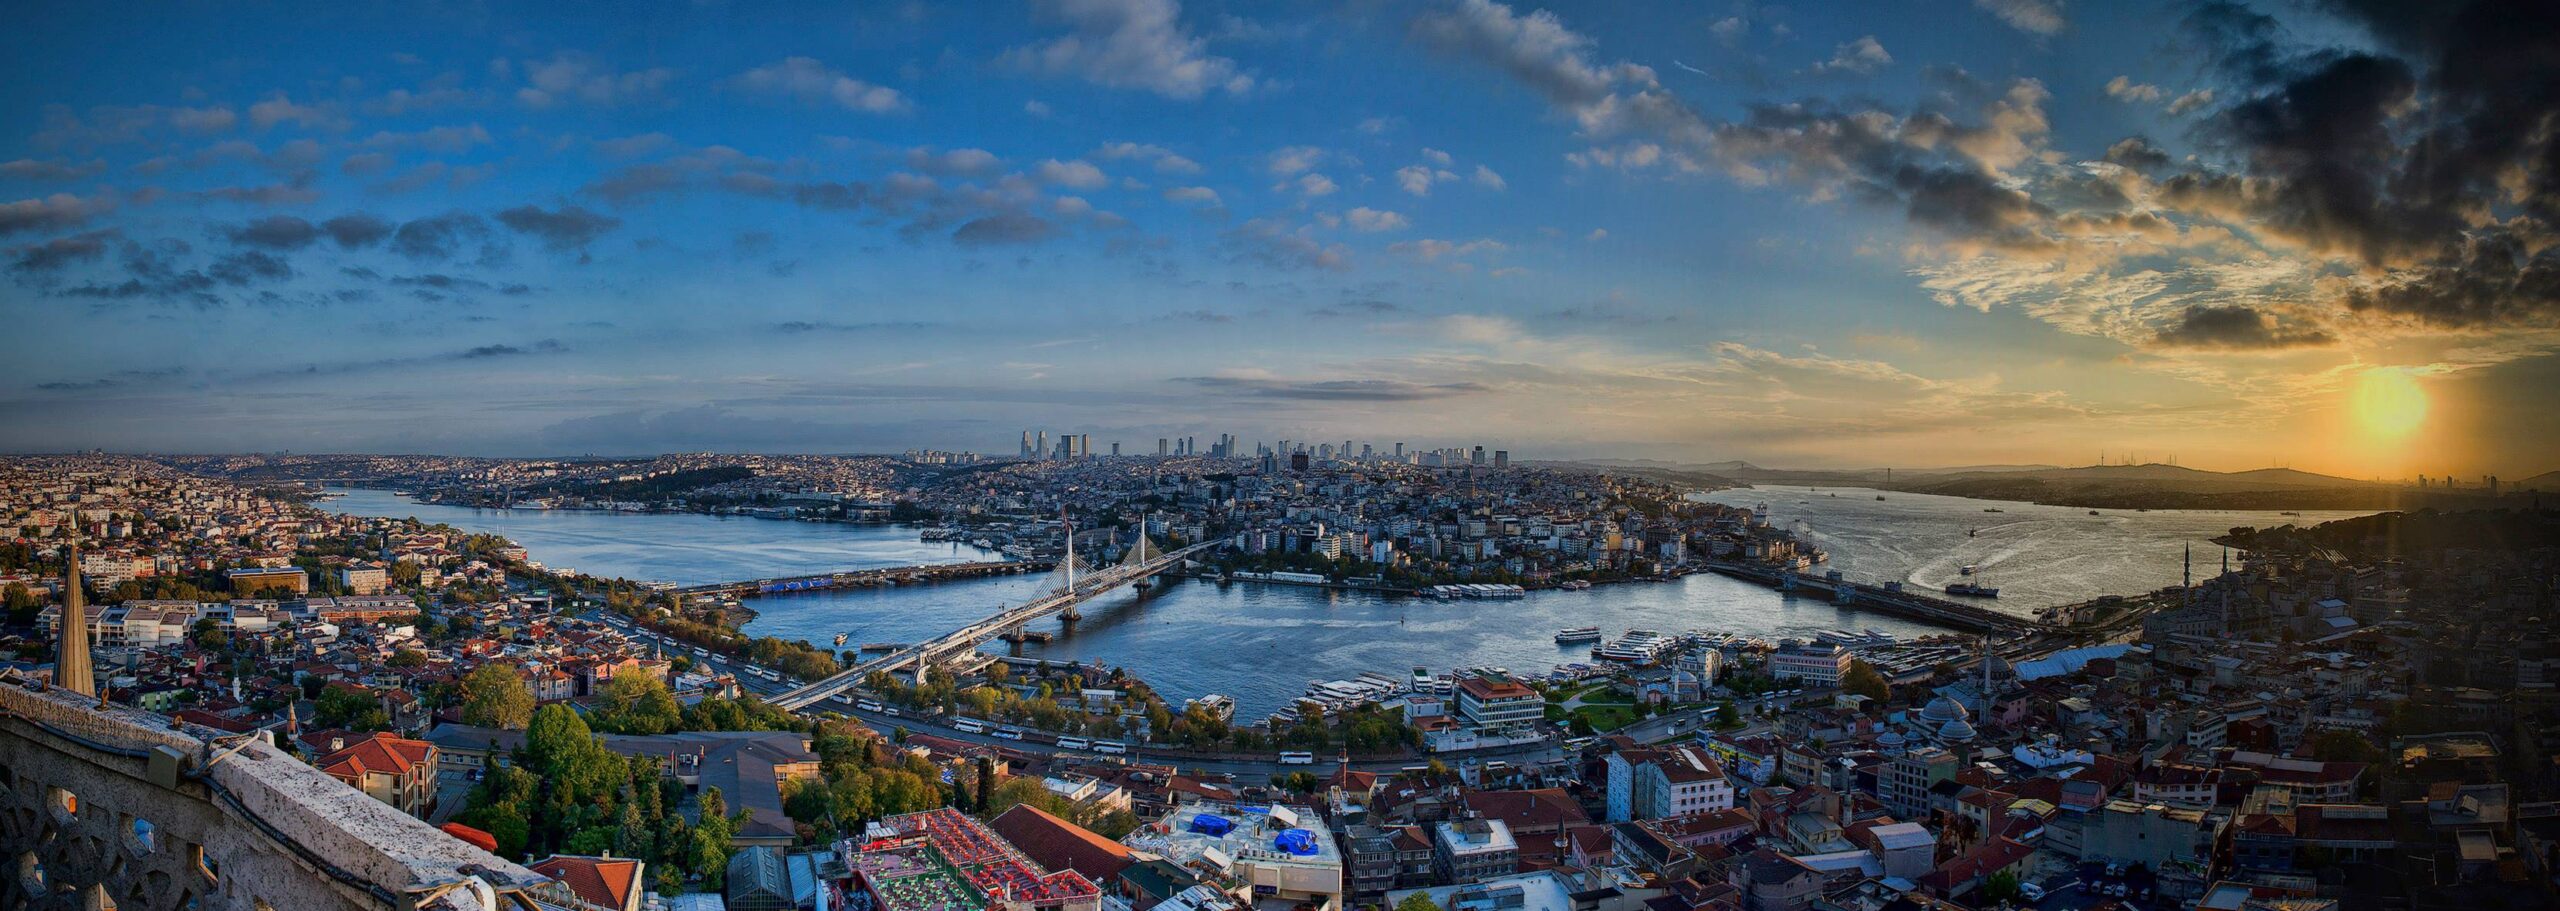 Istanbul wallpapers 2K backgrounds download Facebook Covers